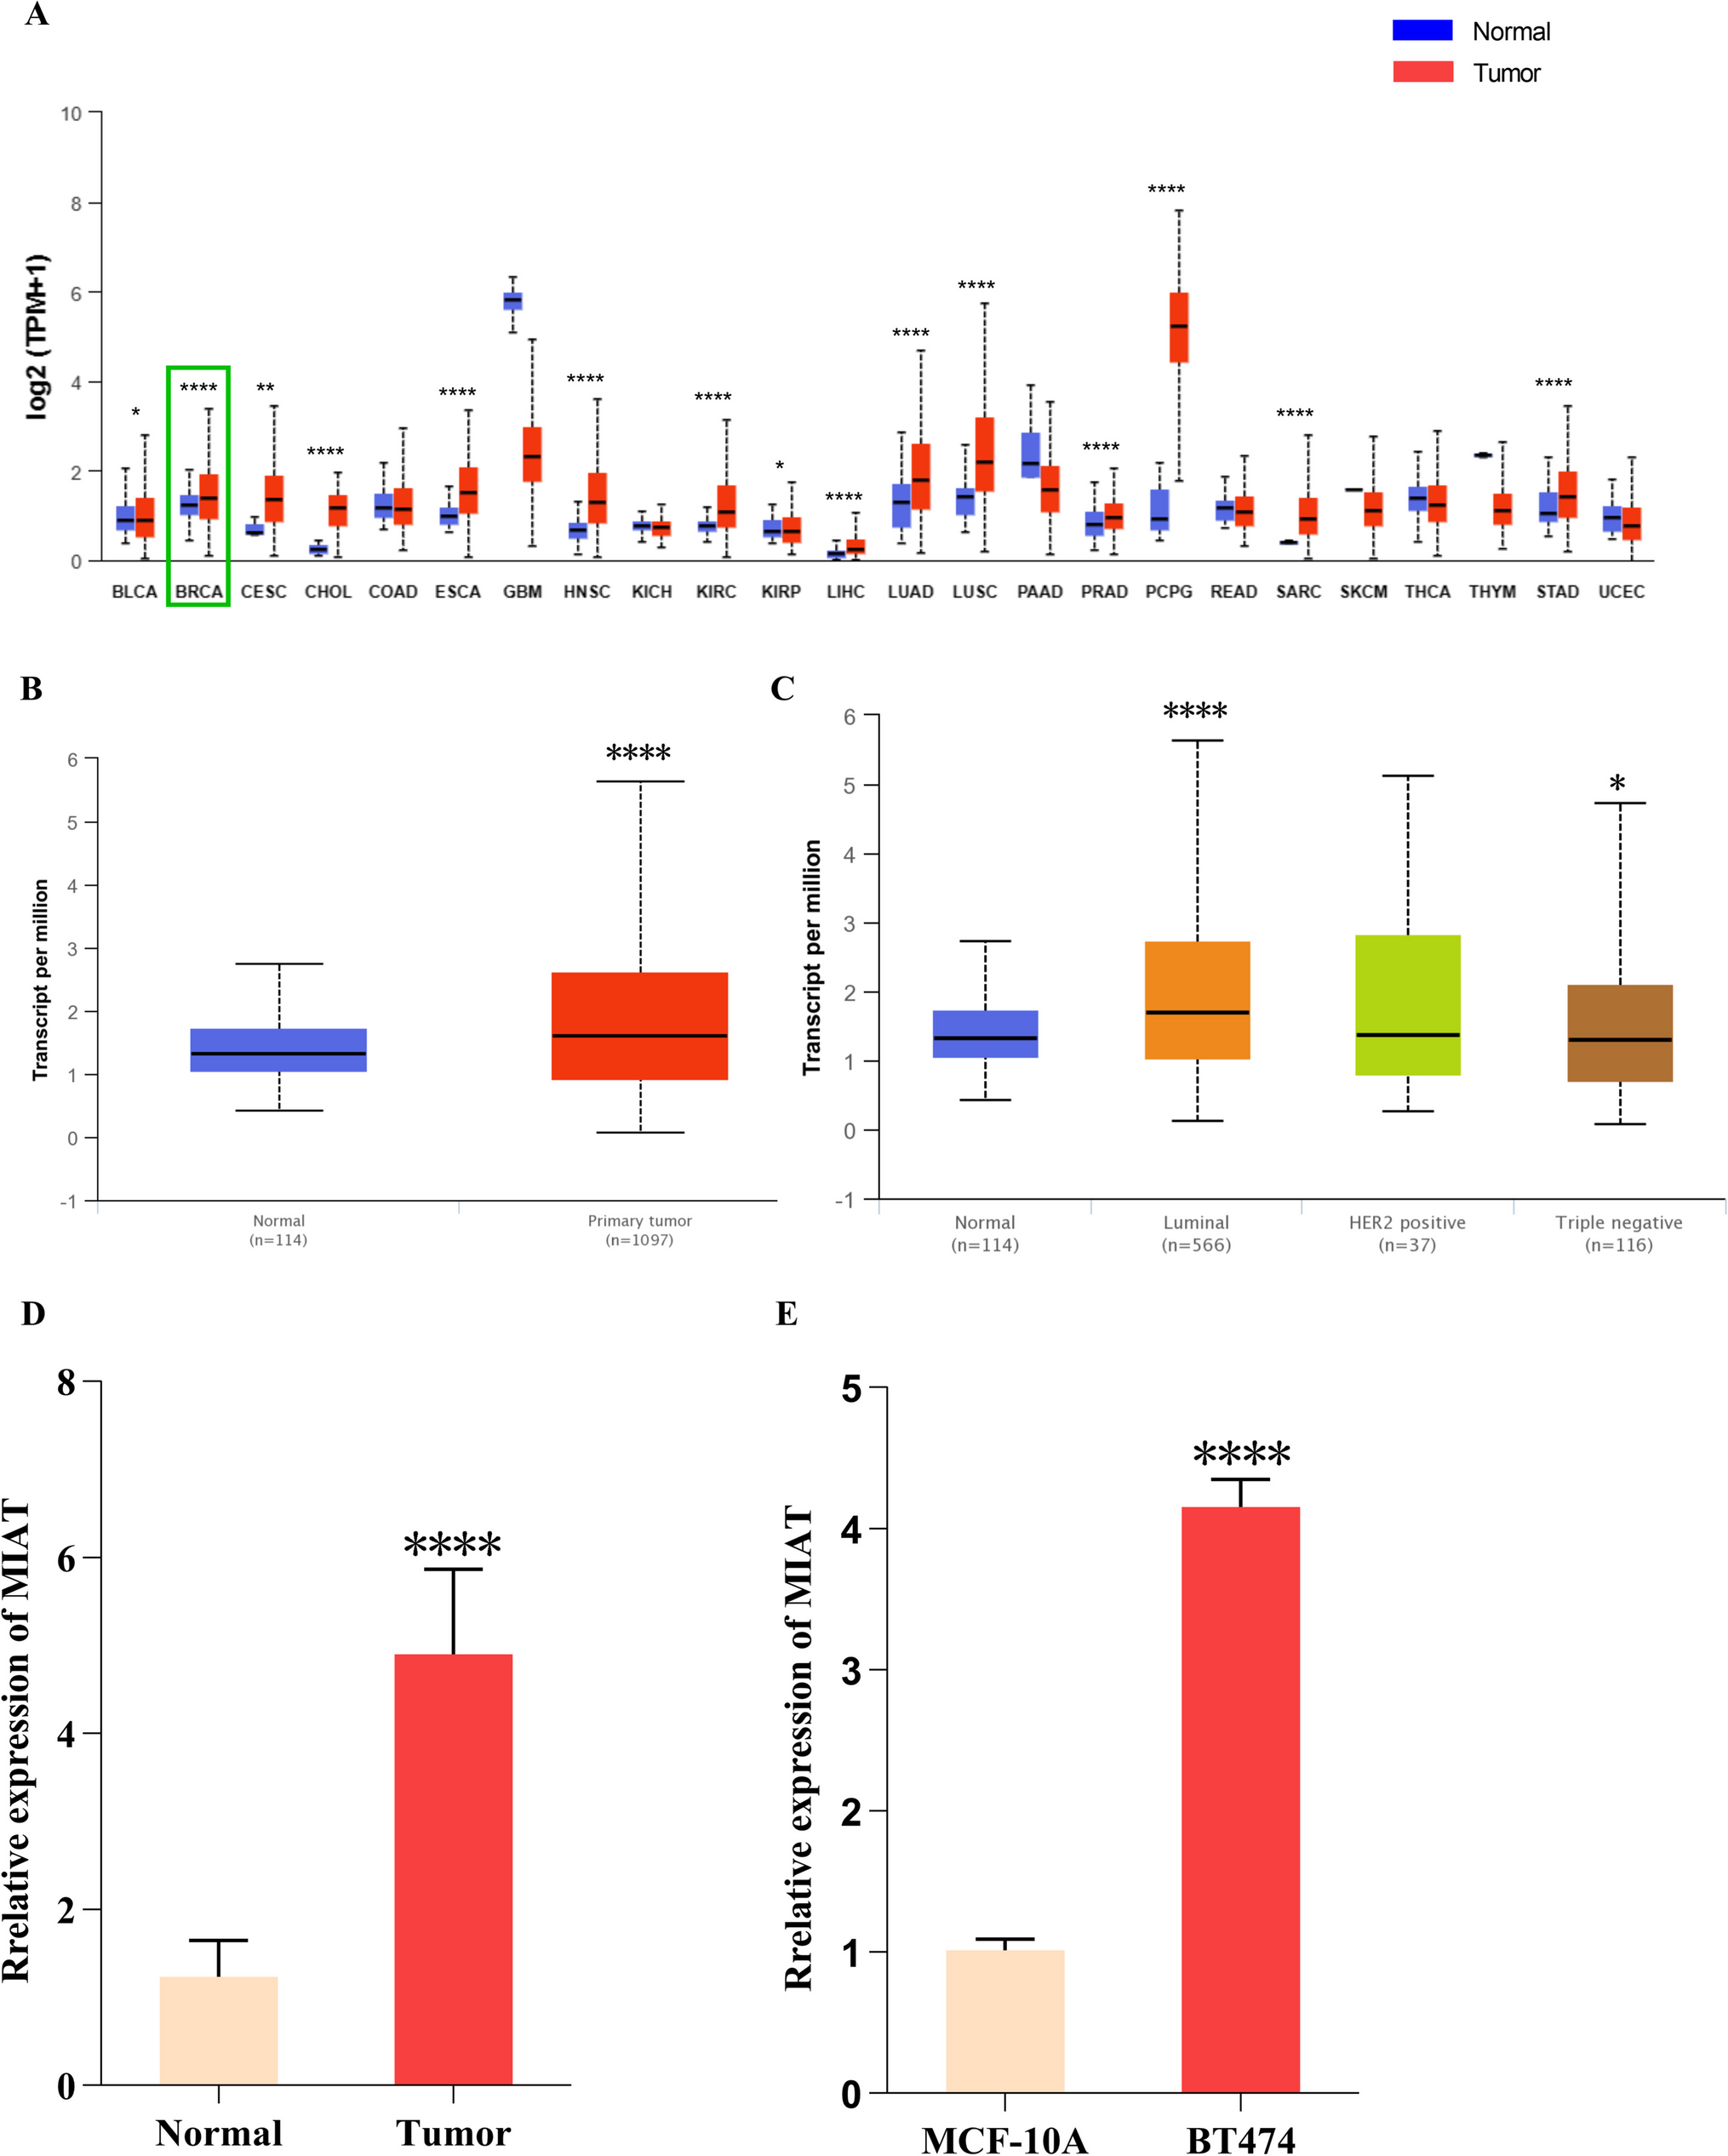 lncRNA MIAT promotes luminal B breast cancer cell proliferation, migration, and invasion in vitro